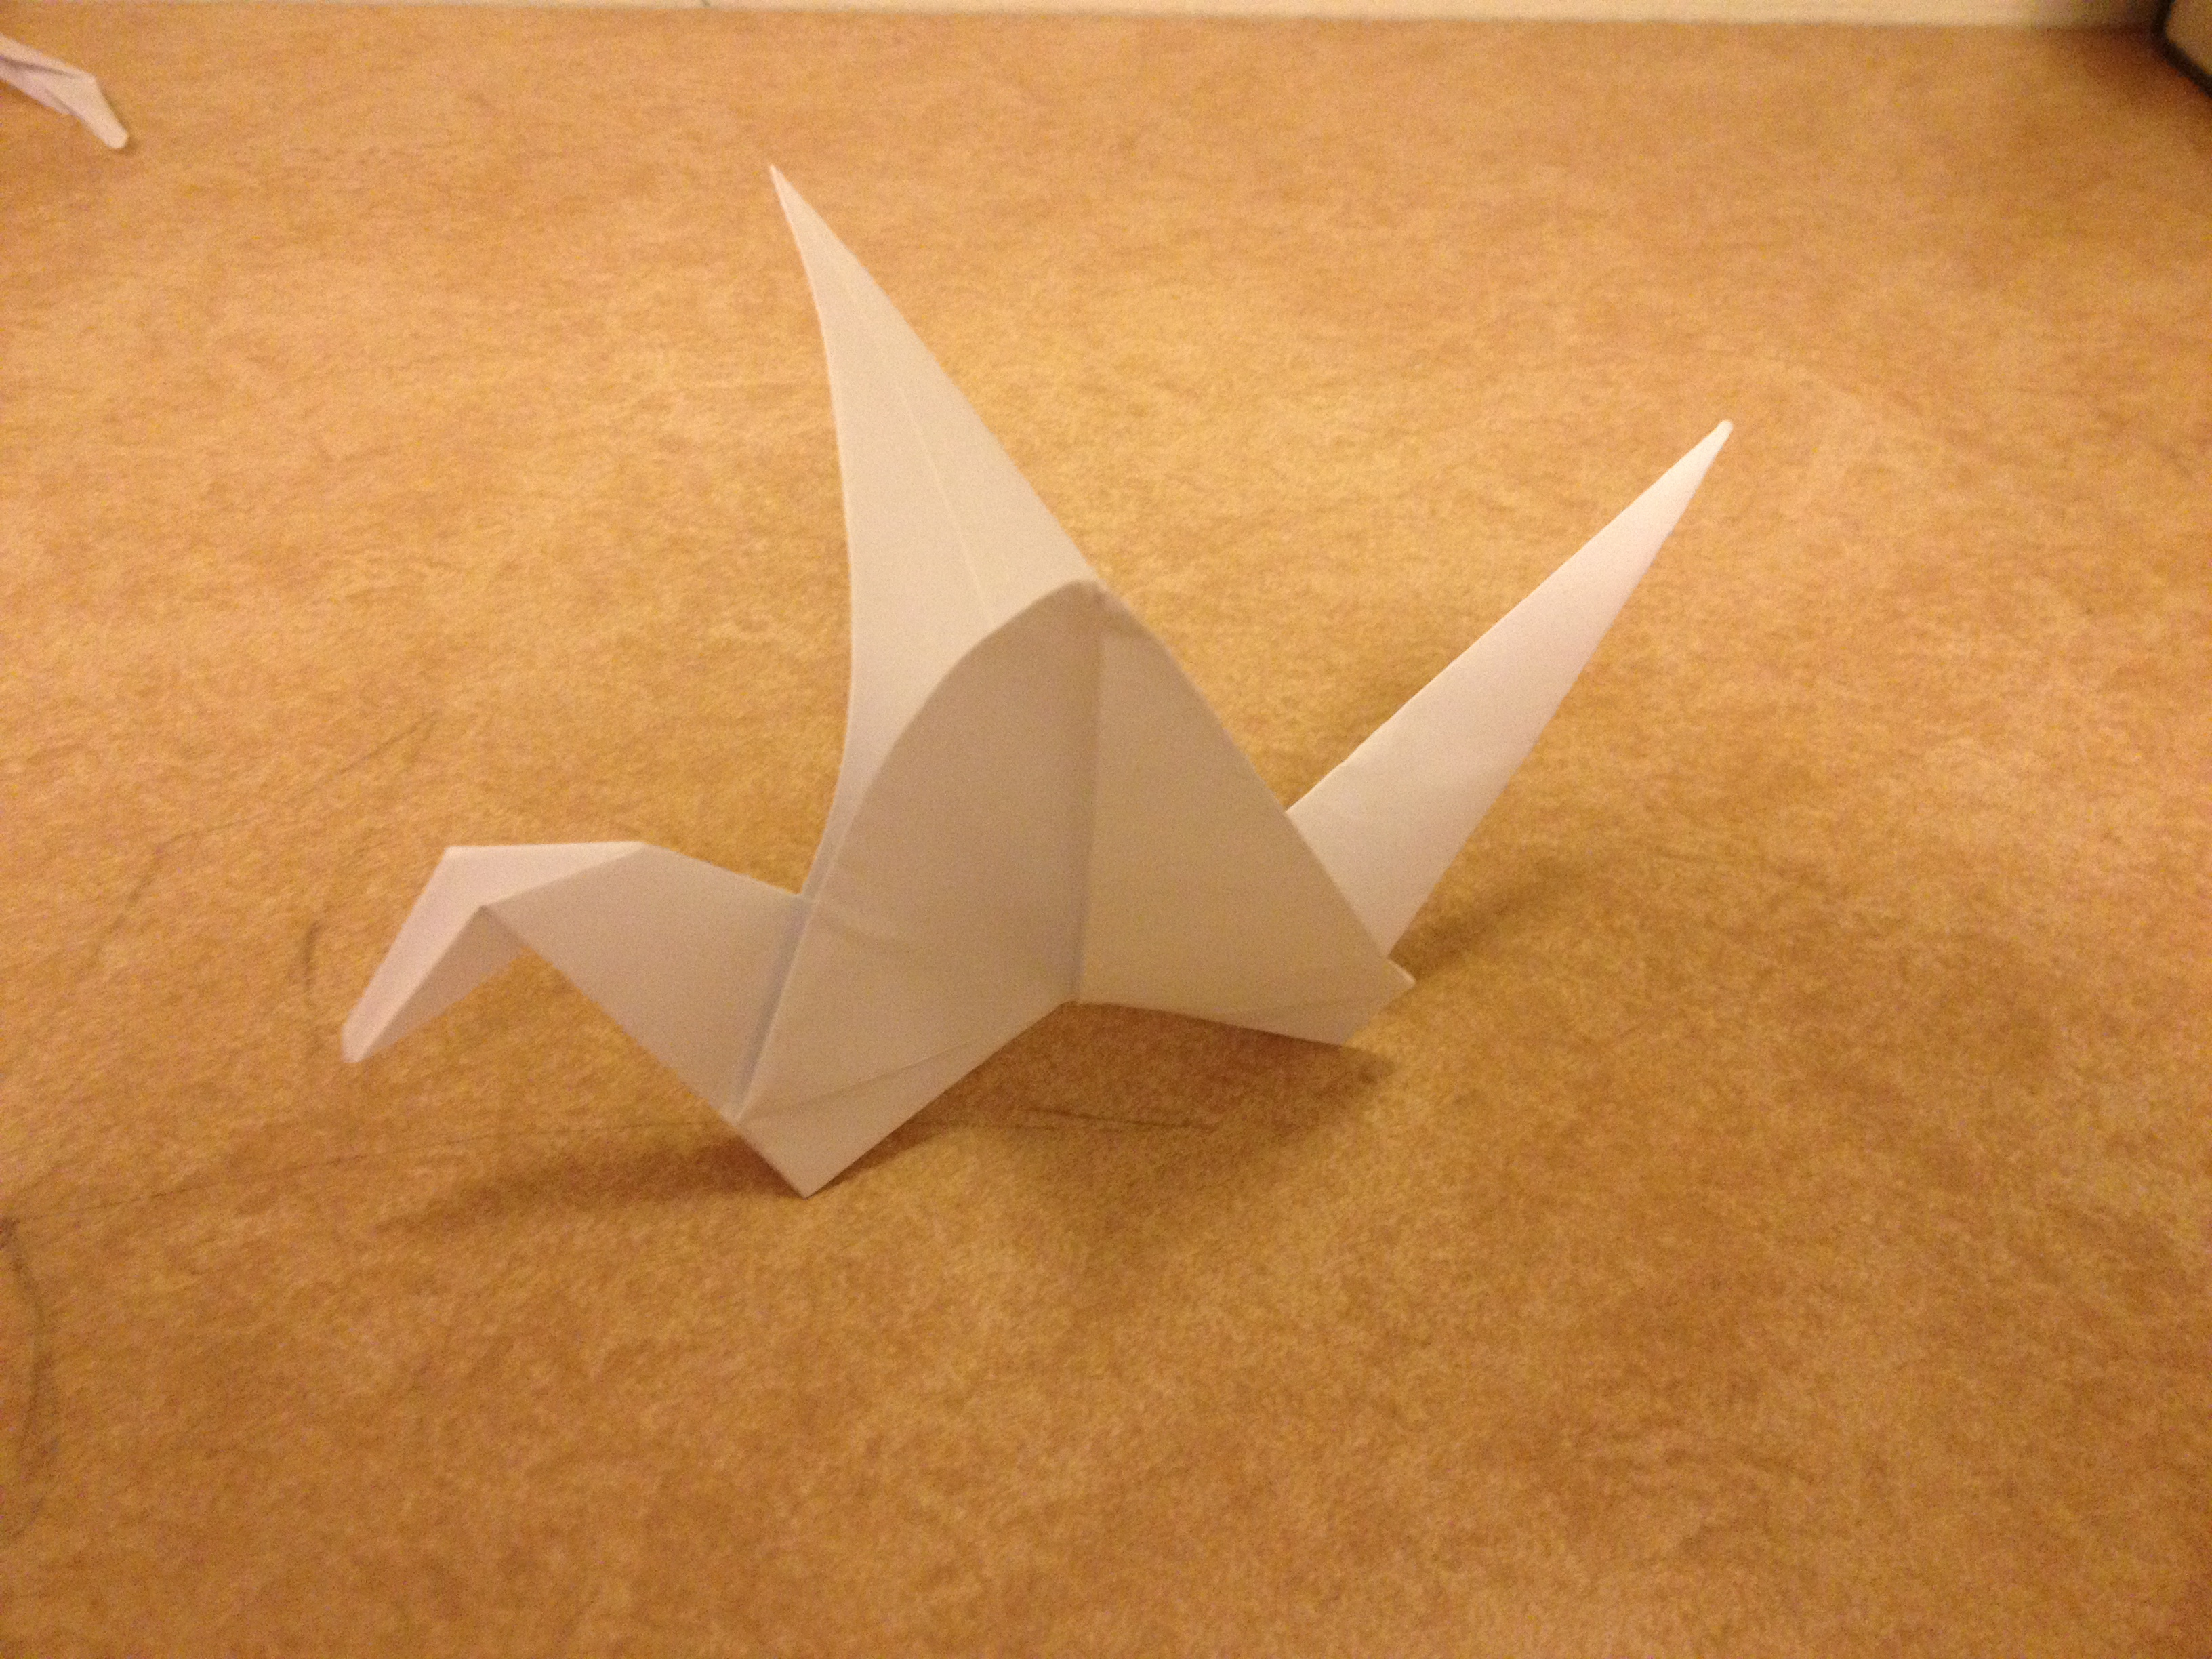 Flapping Bird Origami Instructions Origami Flapping Swan 7 Steps